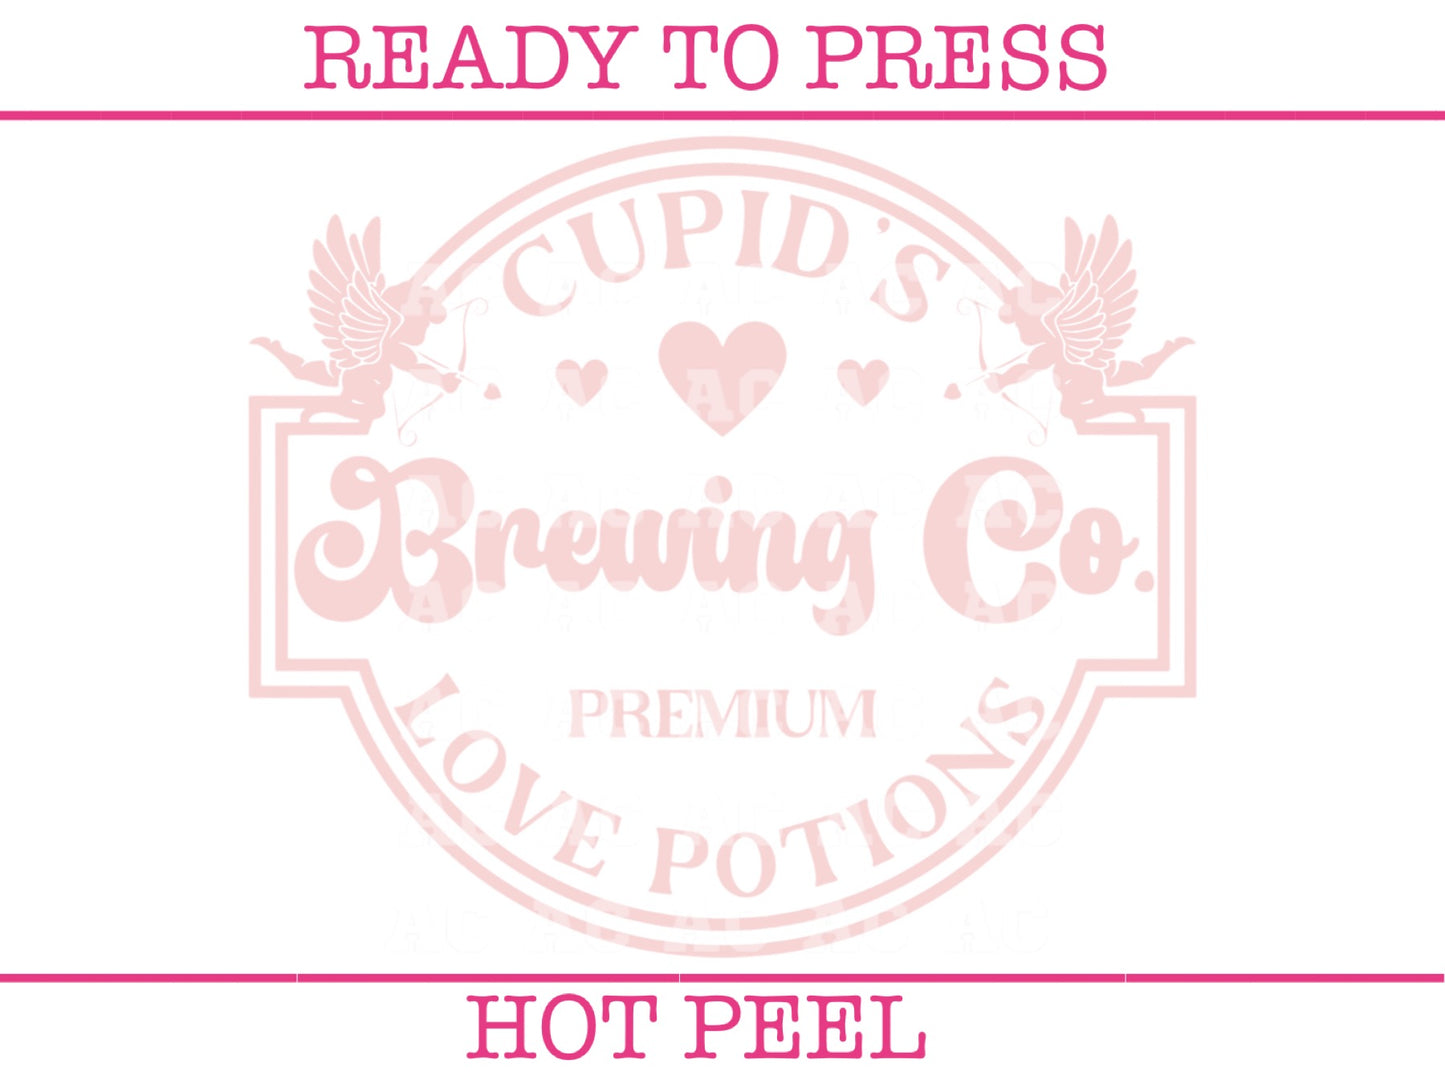 Cupid's Brewing Co. Premium Love Potions (Pink) DTF TRANSFER